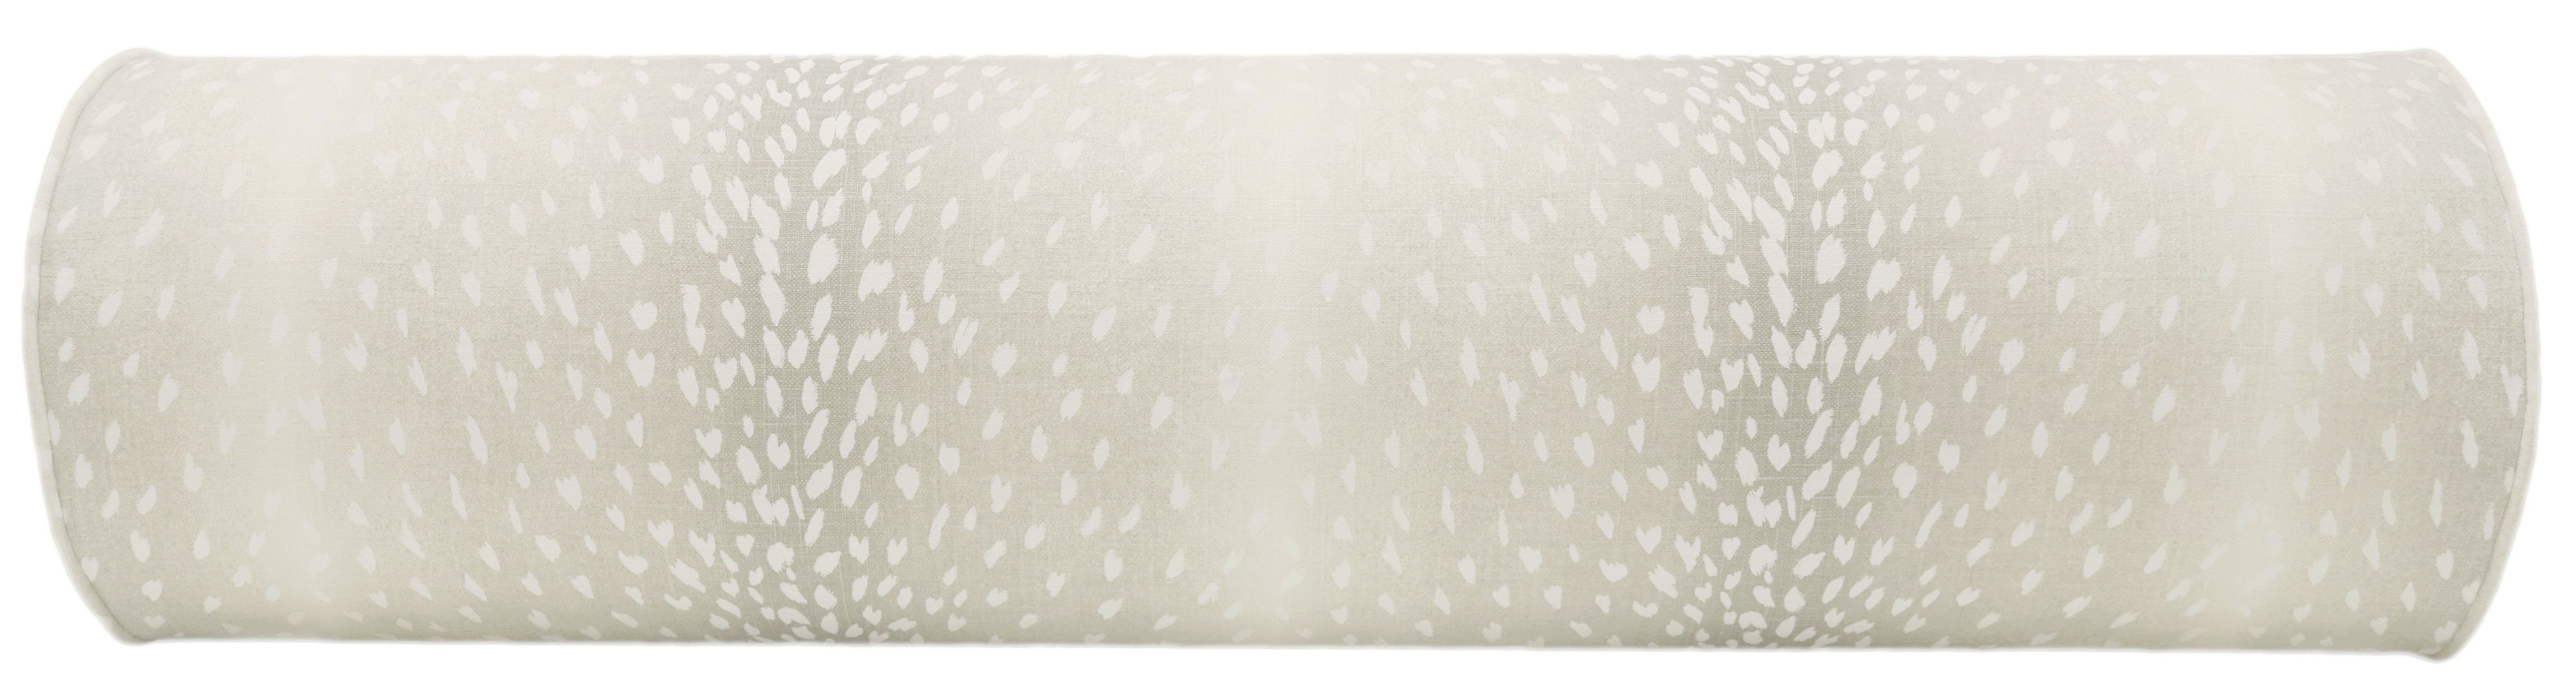 The Bolster :: Antelope Linen Print // Cashmere - QUEEN // 9" X 36" - Image 1